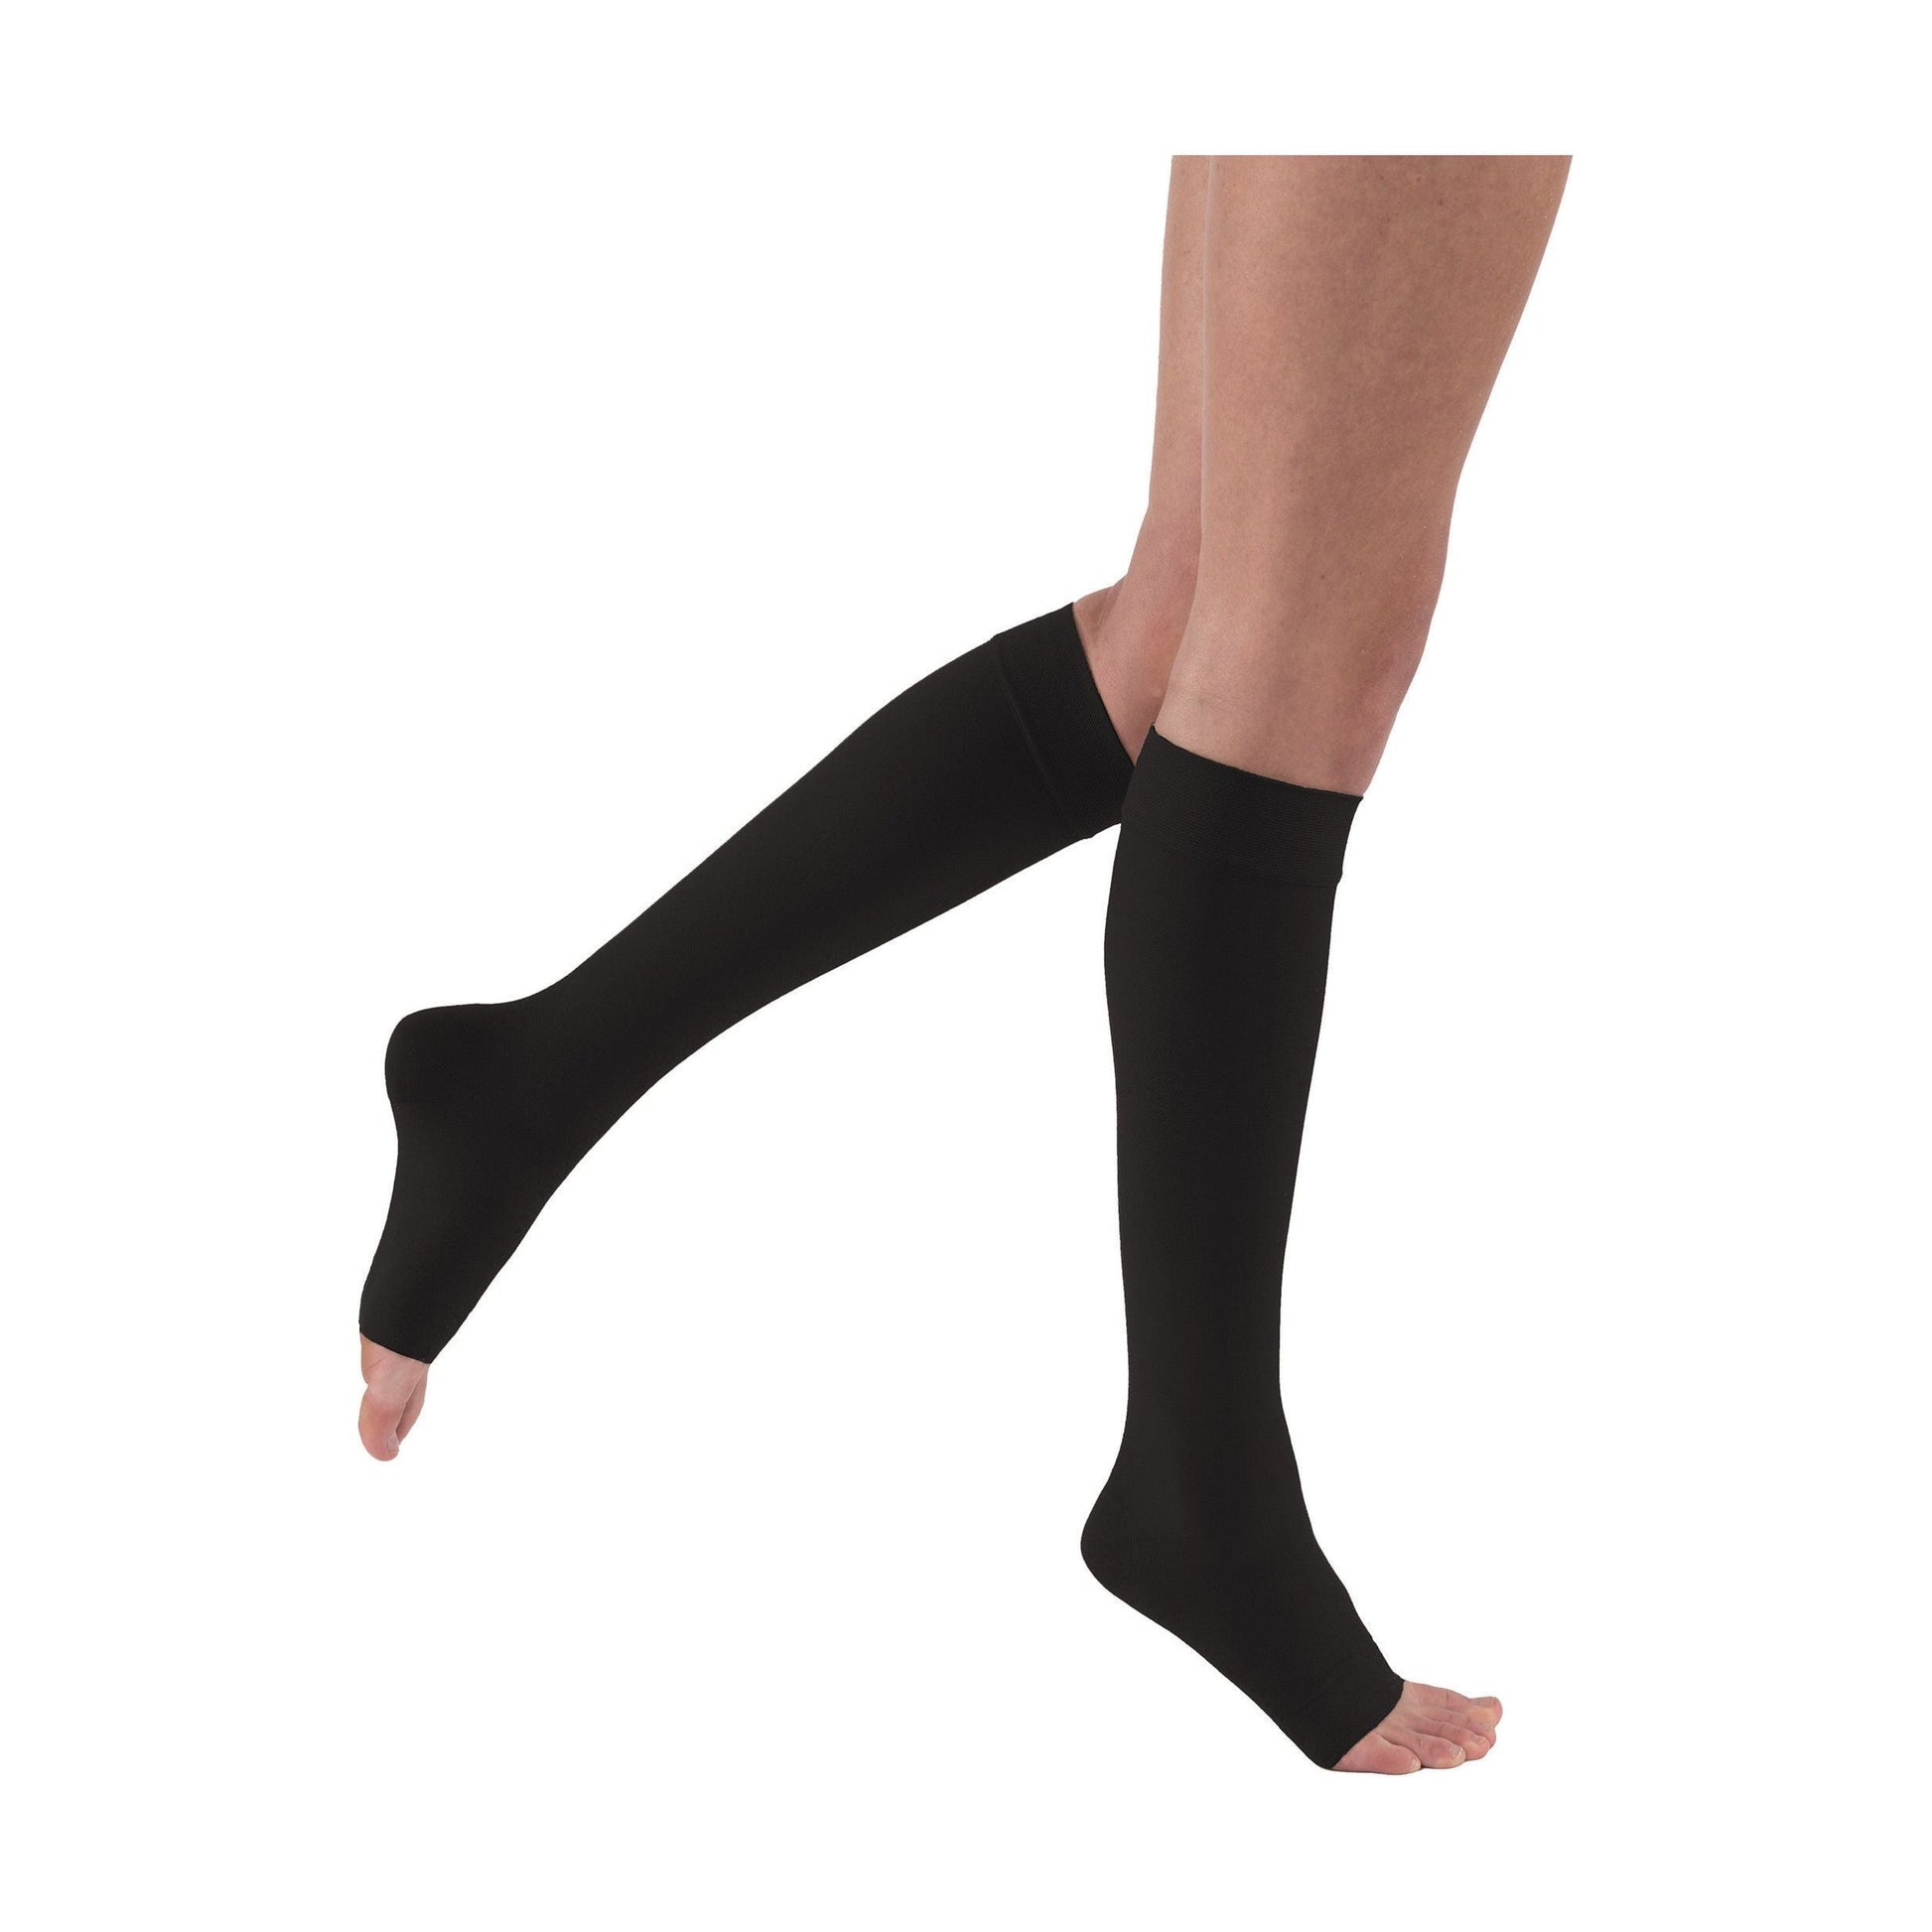 Compression Stockings Firm Support Socks Varicose Veins Edema 15-20 mmHg  Medical